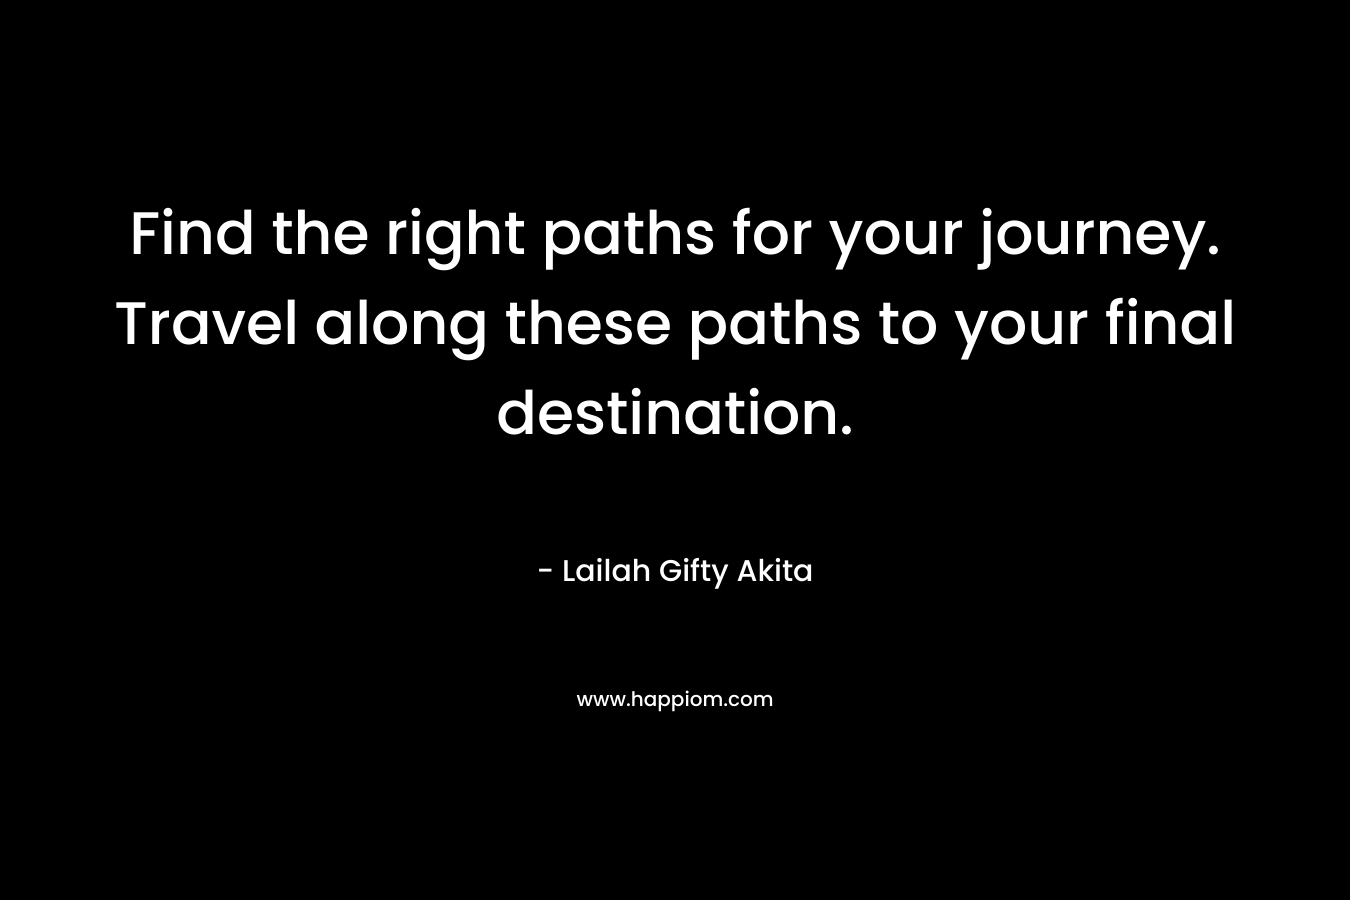 Find the right paths for your journey. Travel along these paths to your final destination.